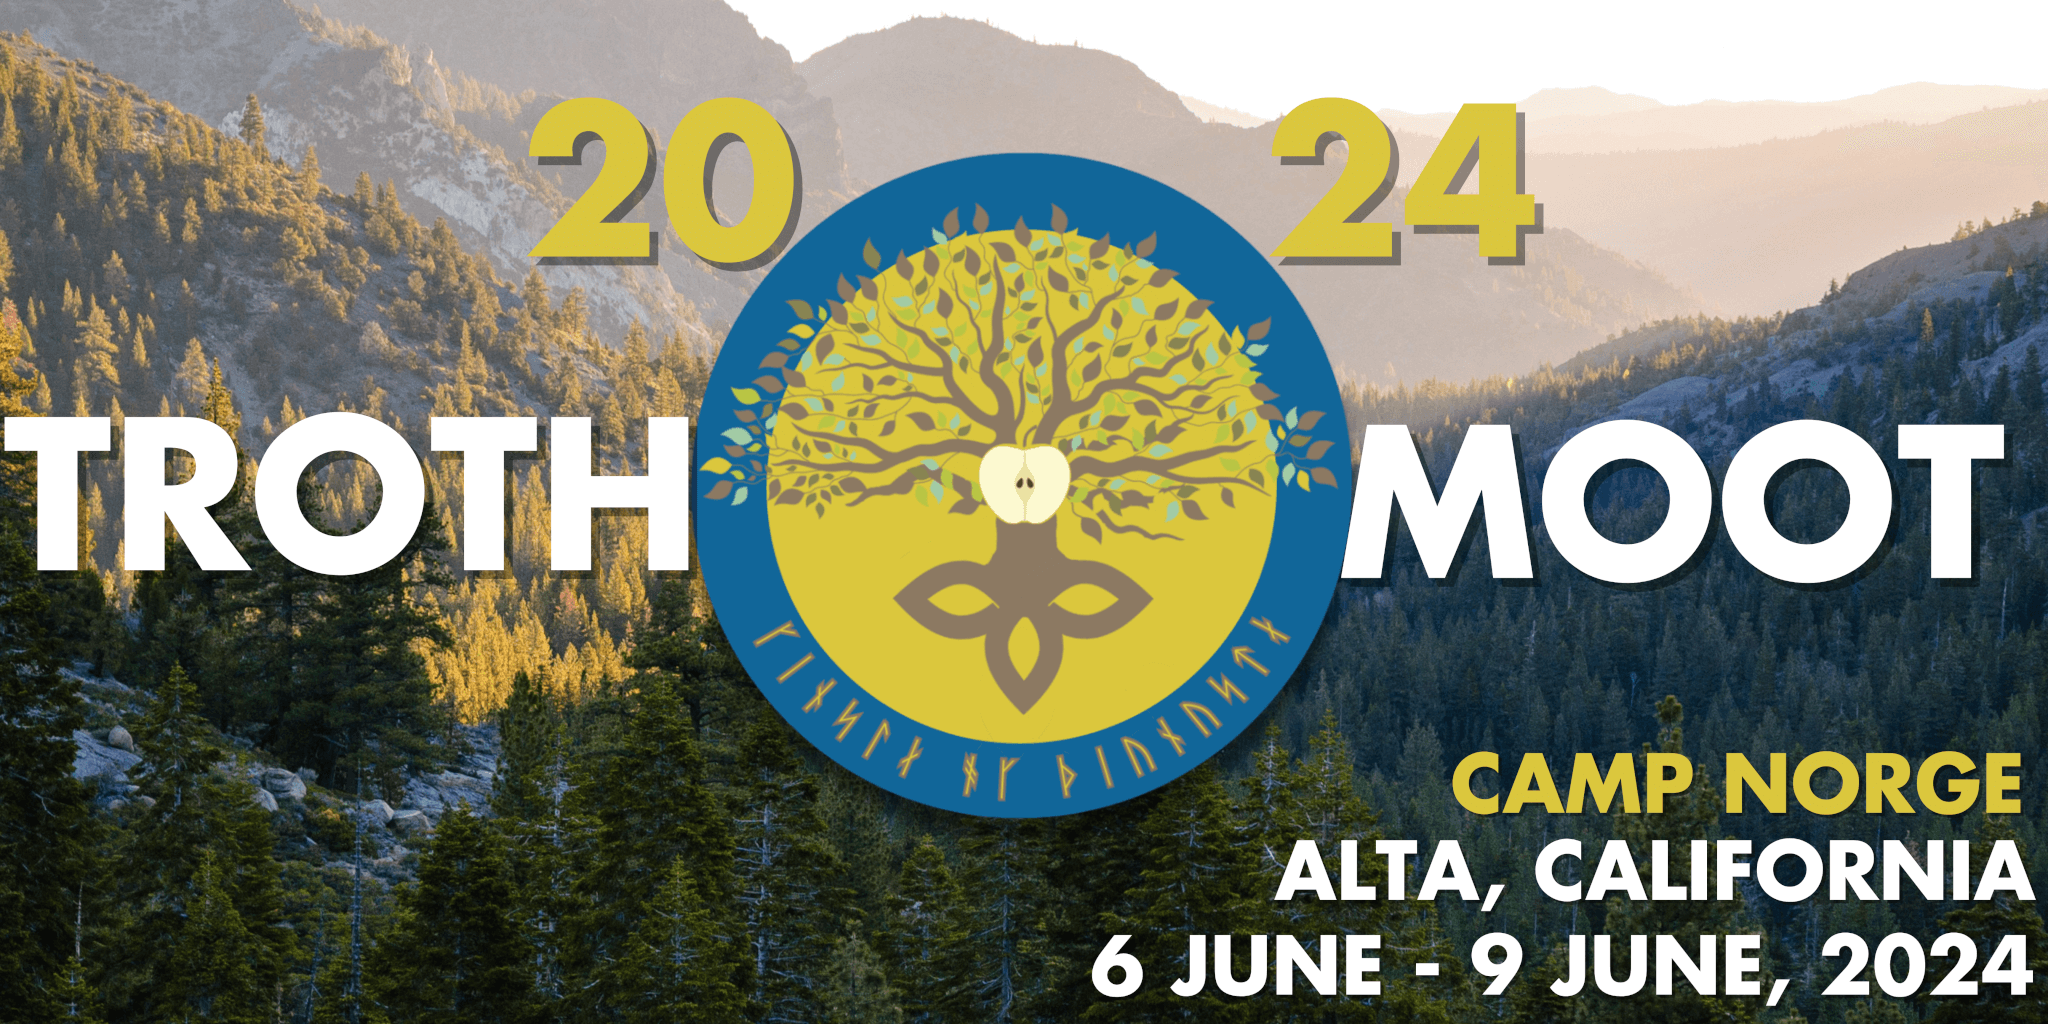 A picture showing a beautiful mountain forrest and overlaid text that says Trothmoot 2024 Camp Norge Alta, California 6 June through 9 June